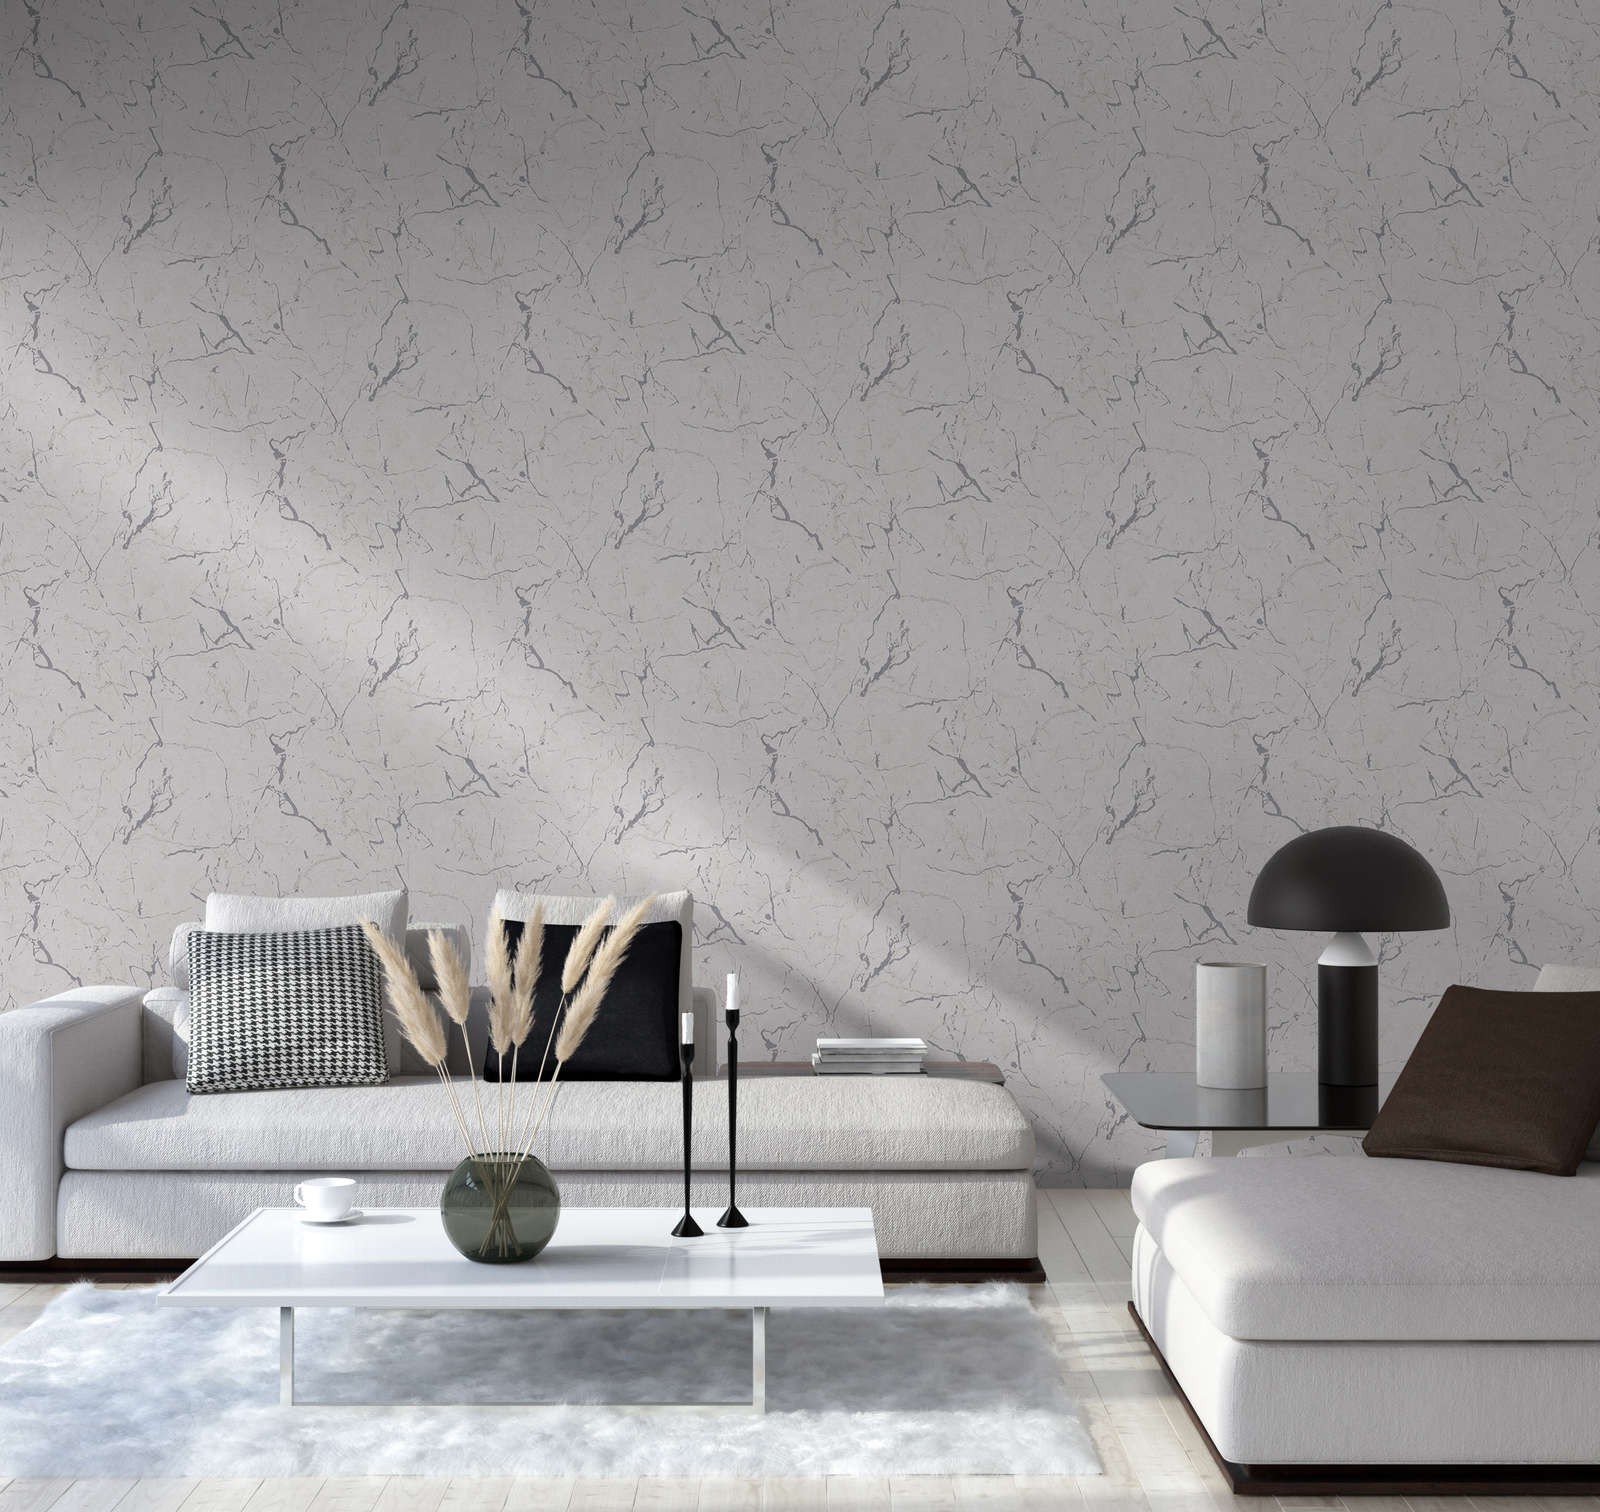             Marble wallpaper with silver gloss effect - grey, metallic, white
        